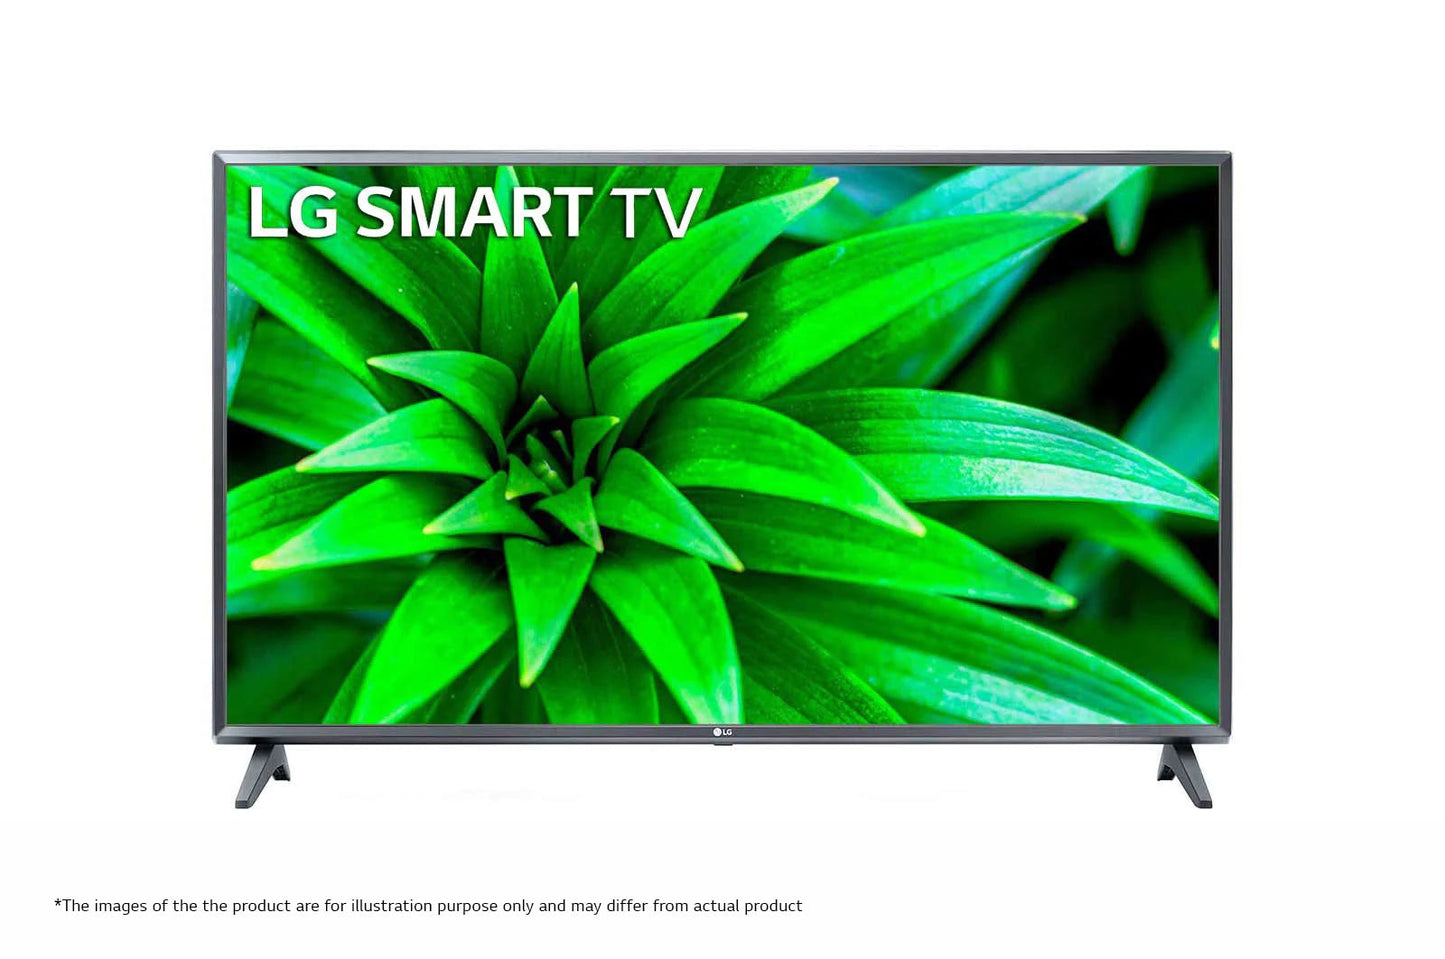 LG LM56 43 (108.22 cm) Smart FHD TV - 43LM5600PTC| WebOS w/ Unlimited OTT App Support| Active HDR| DTS Virtual:X Surround Sound| Multi Tasking | Home Dashboard